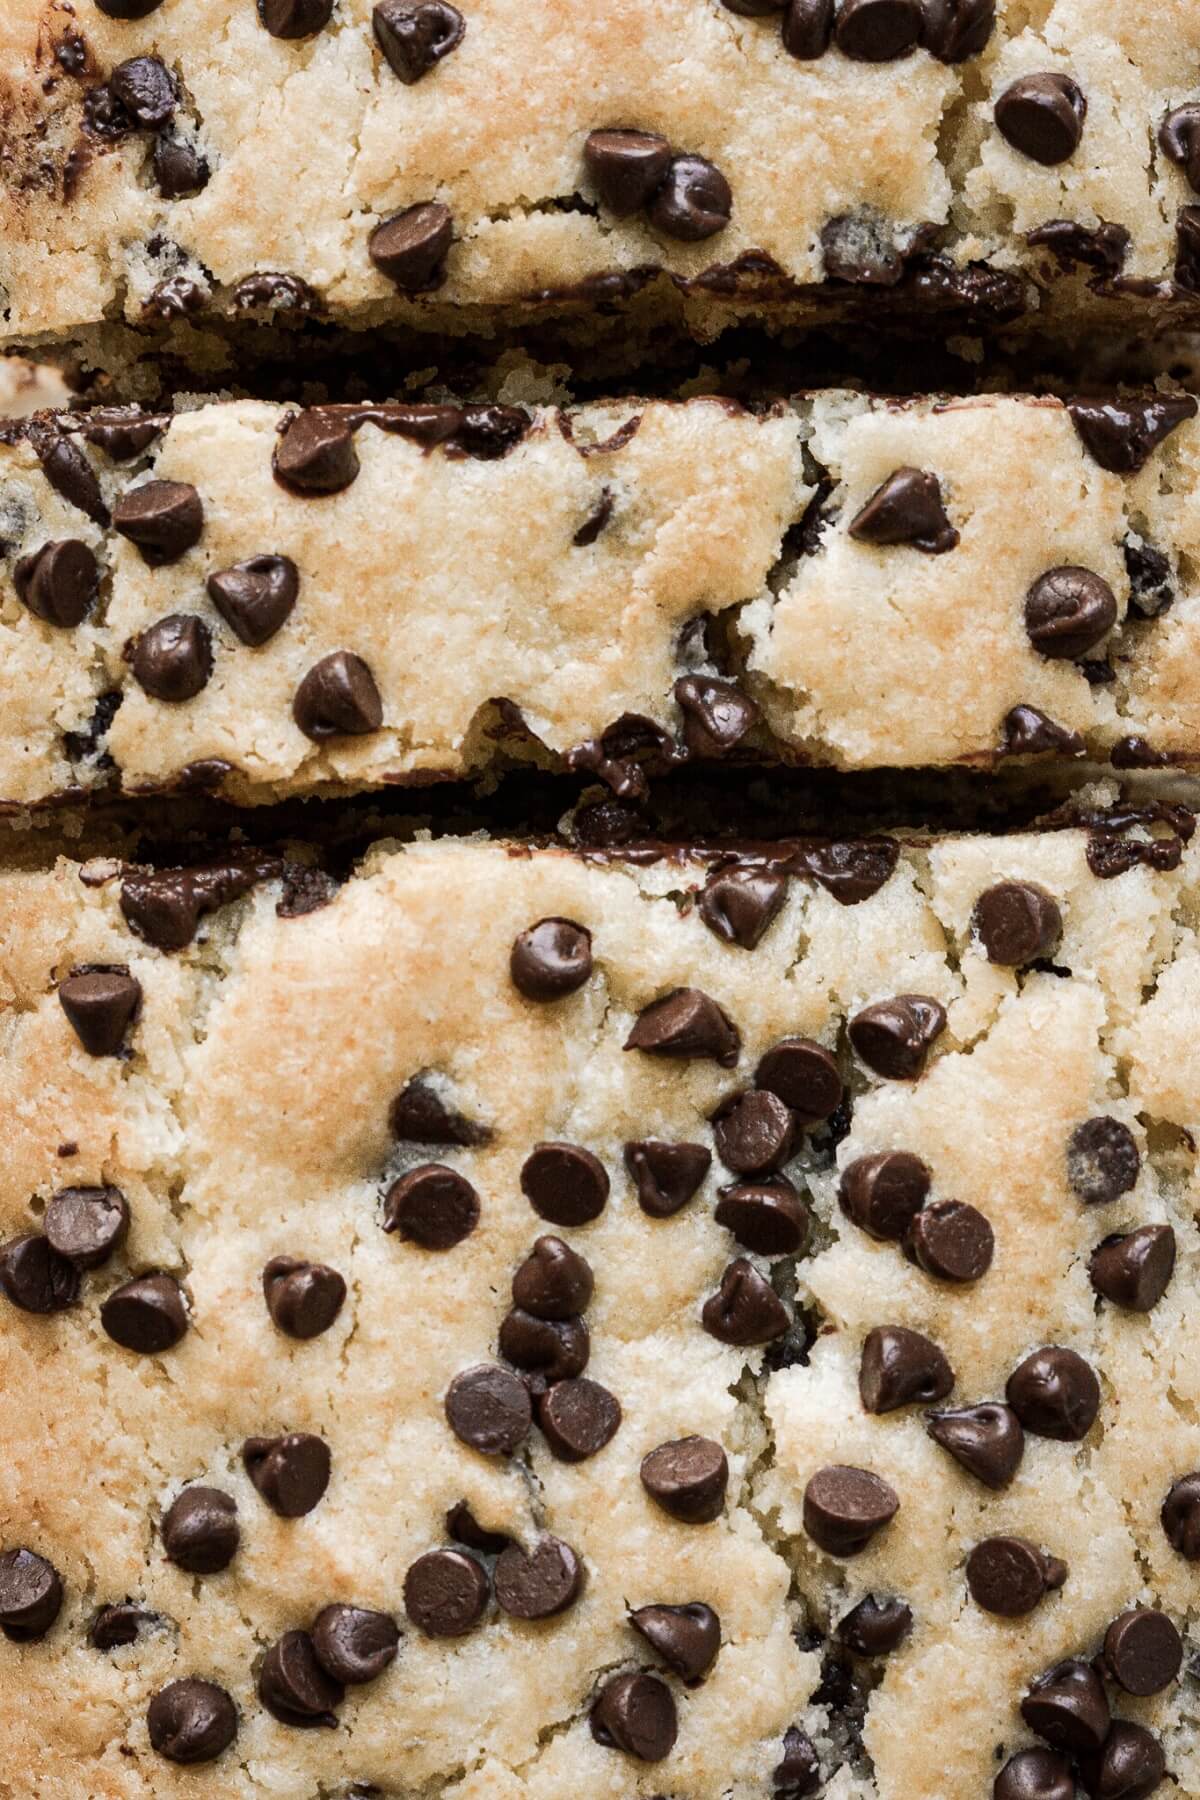 Chocolate chip loaf cake cut into slices.